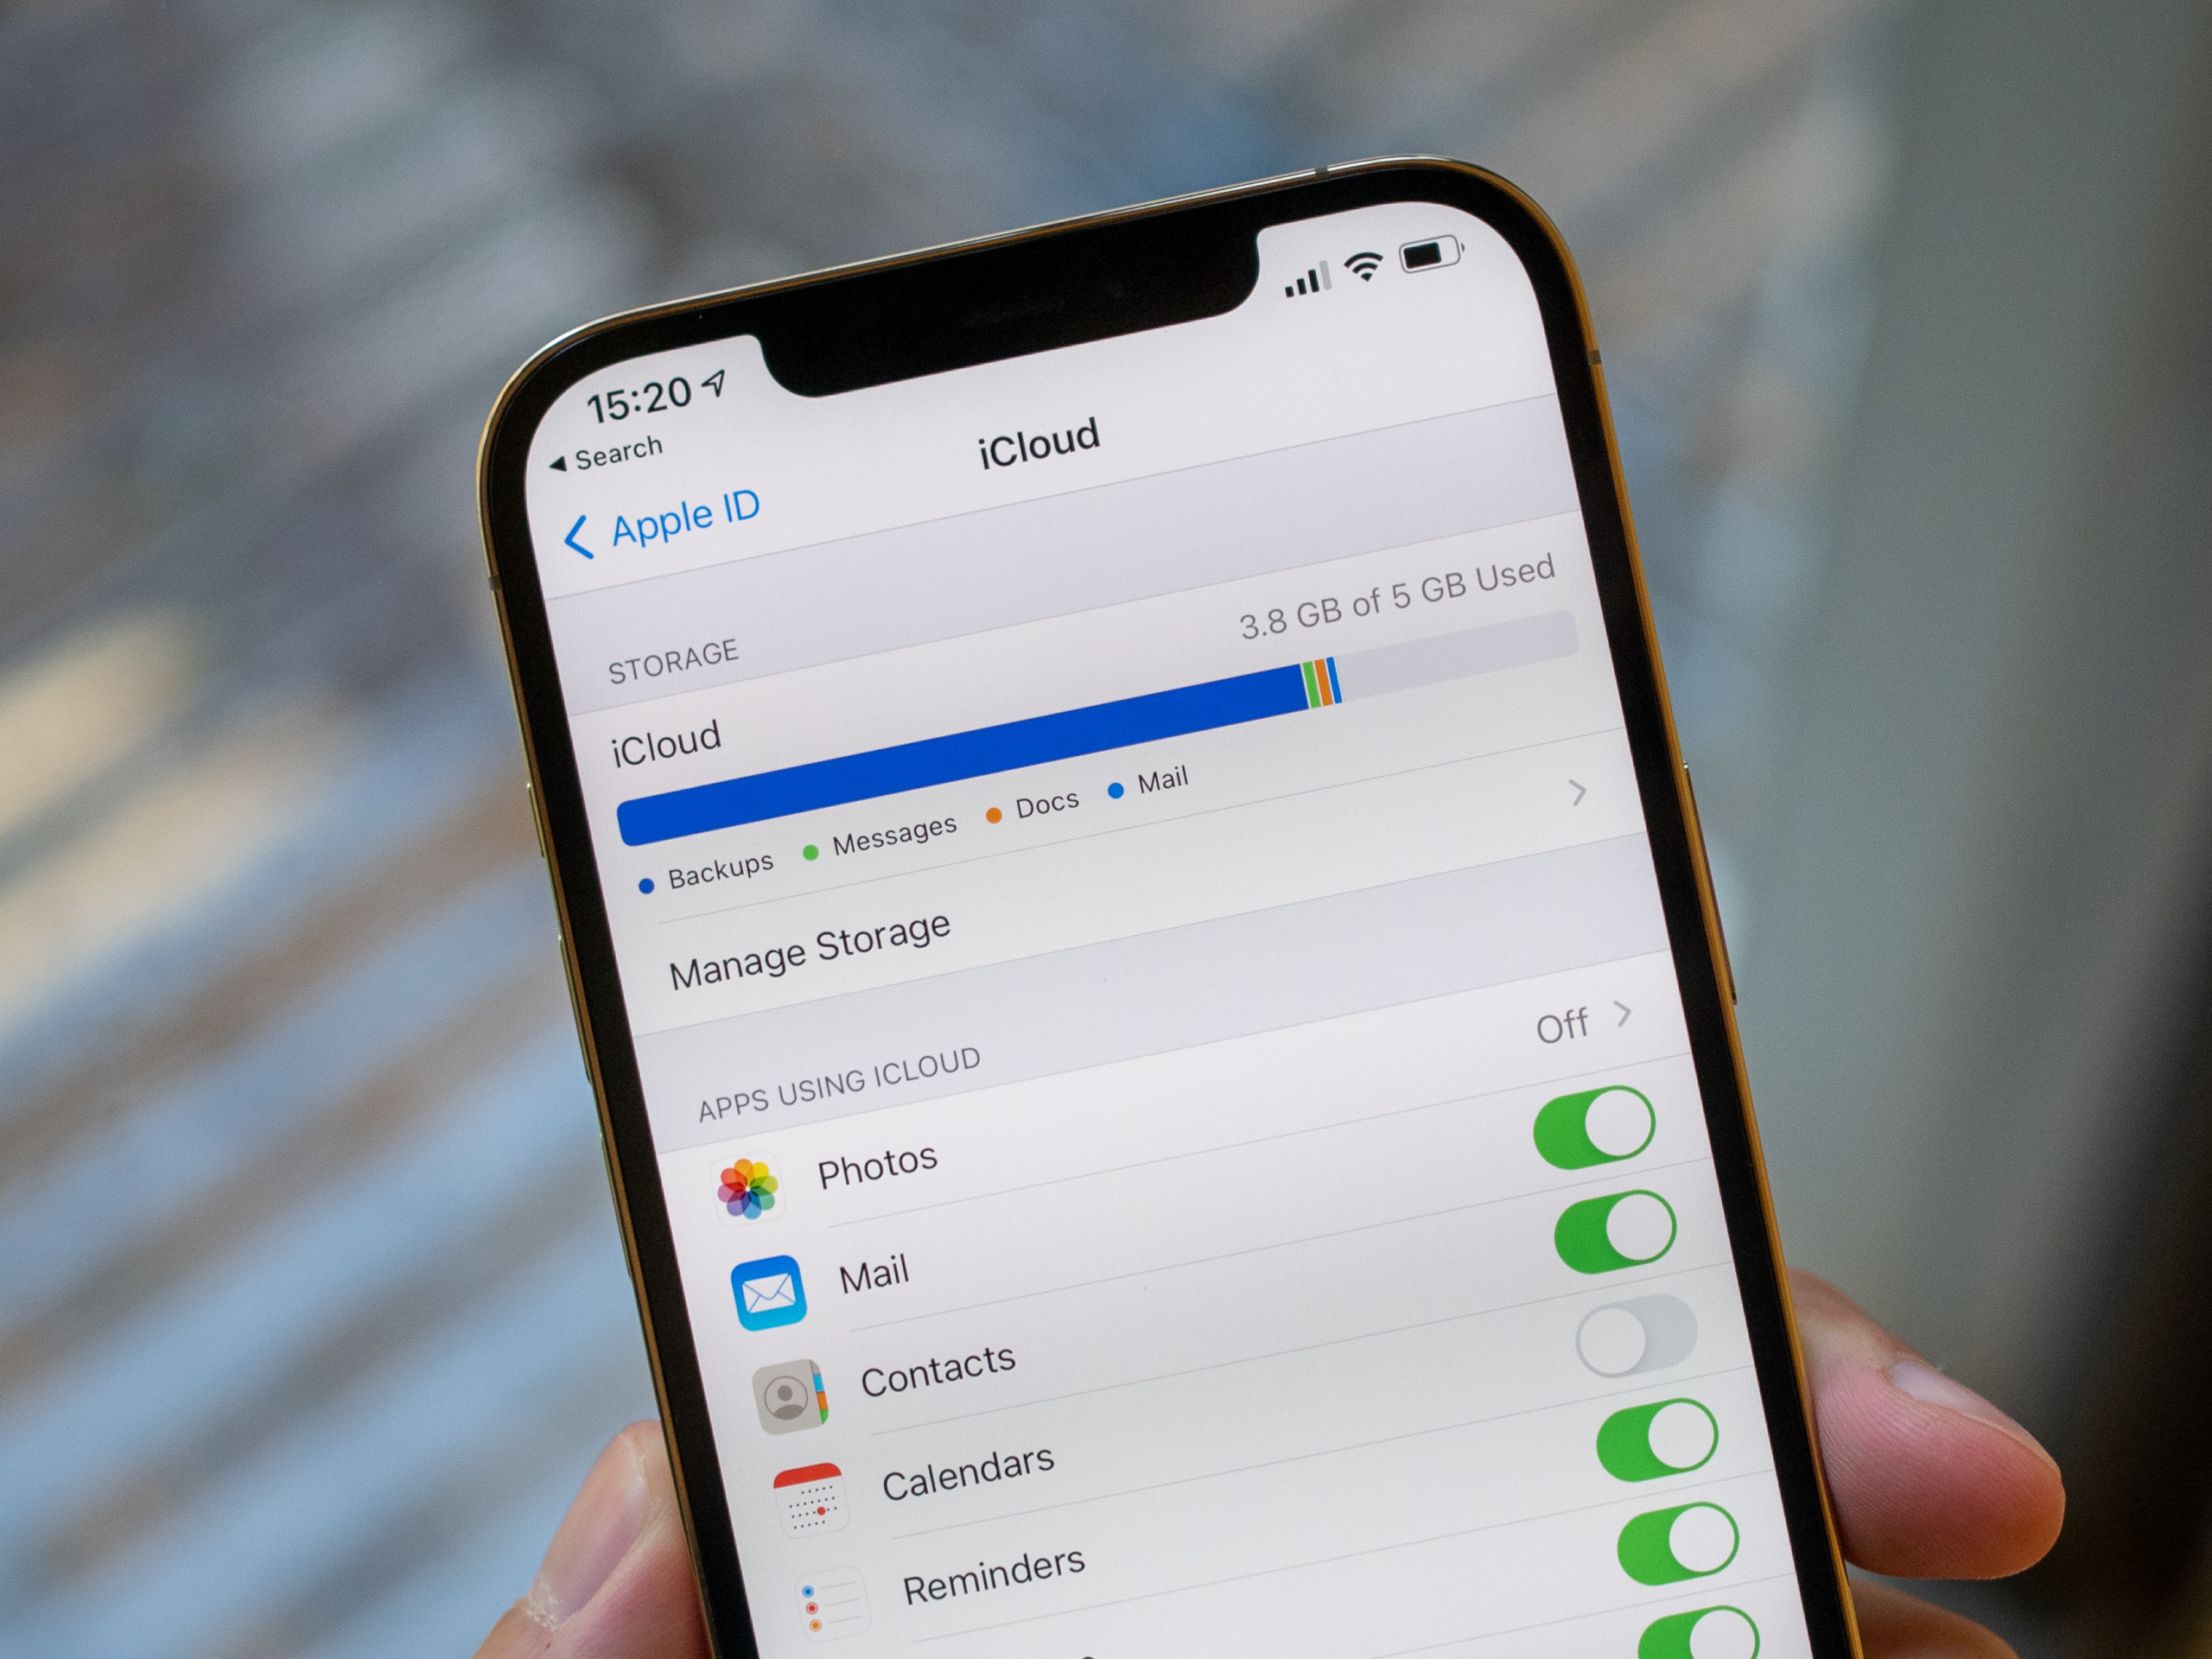  Apples 5GB of free iCloud storage is pitiful, but you should still happily pay for more